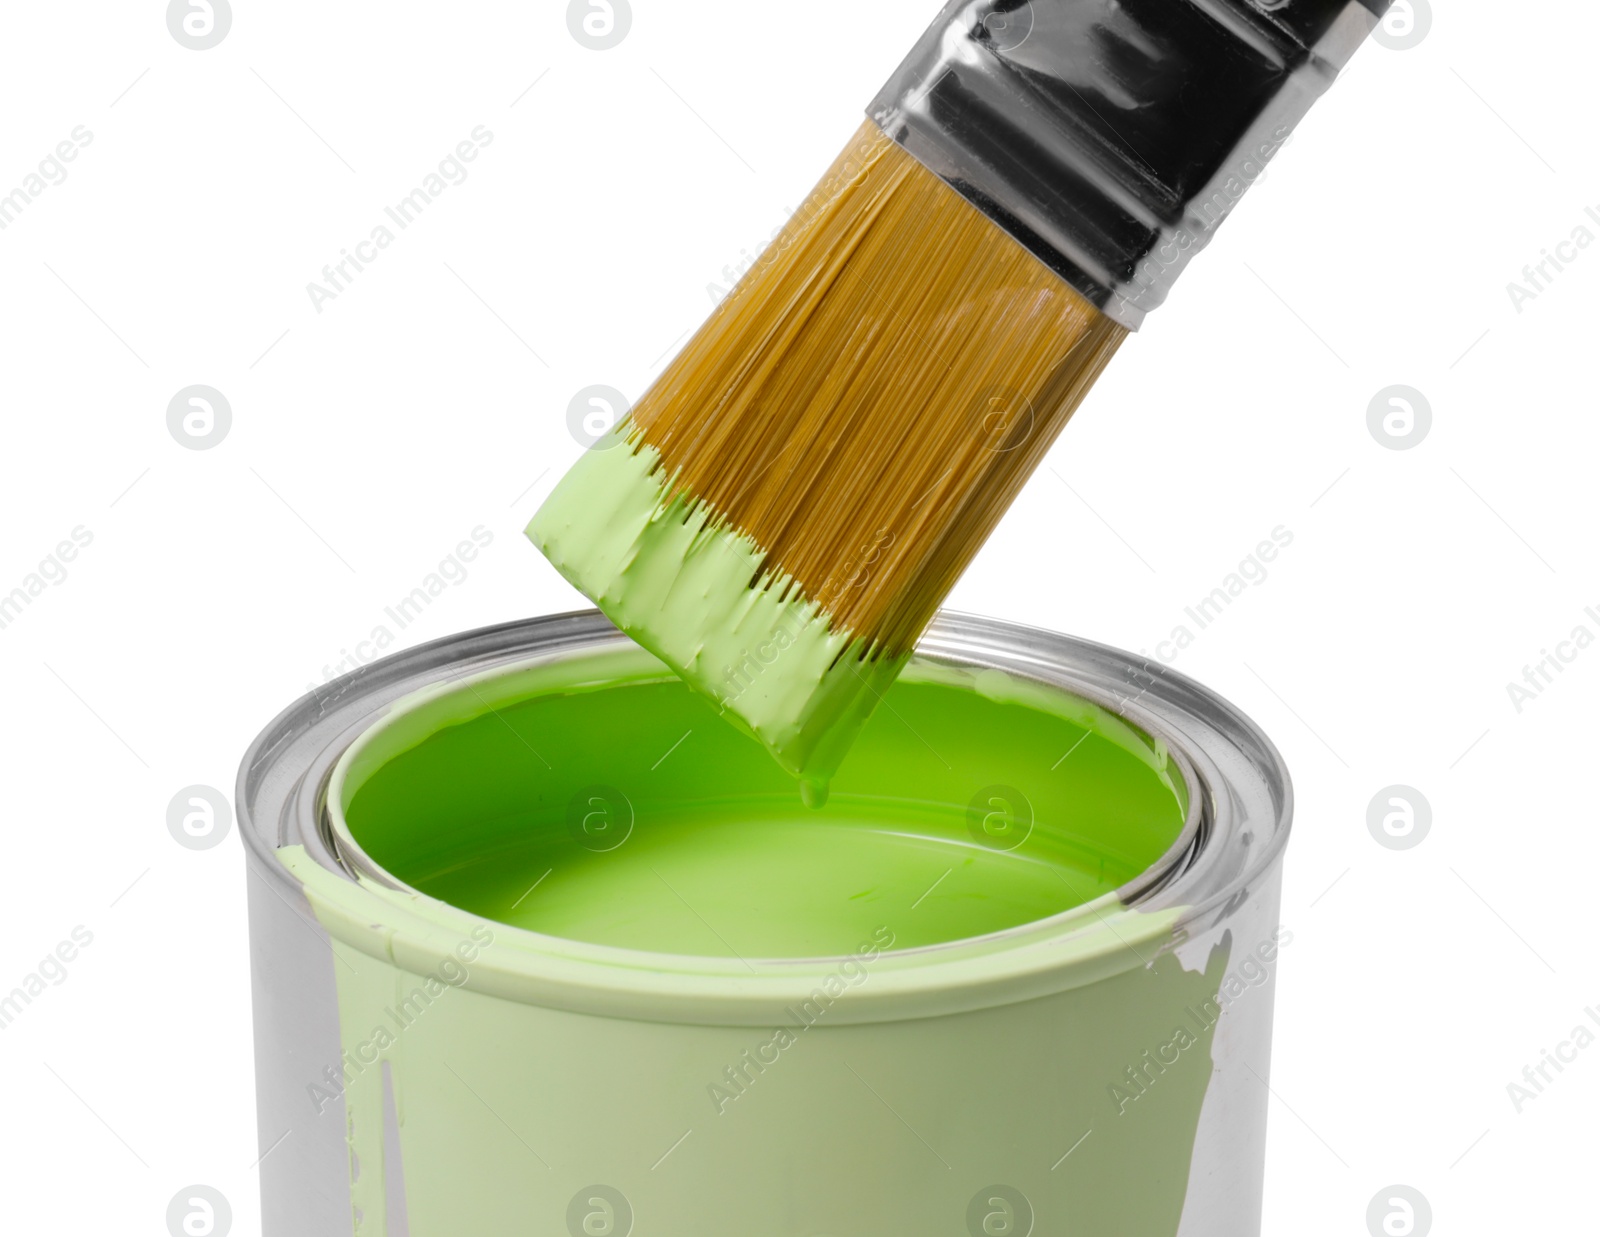 Photo of Can with light green paint and brush on white background, closeup